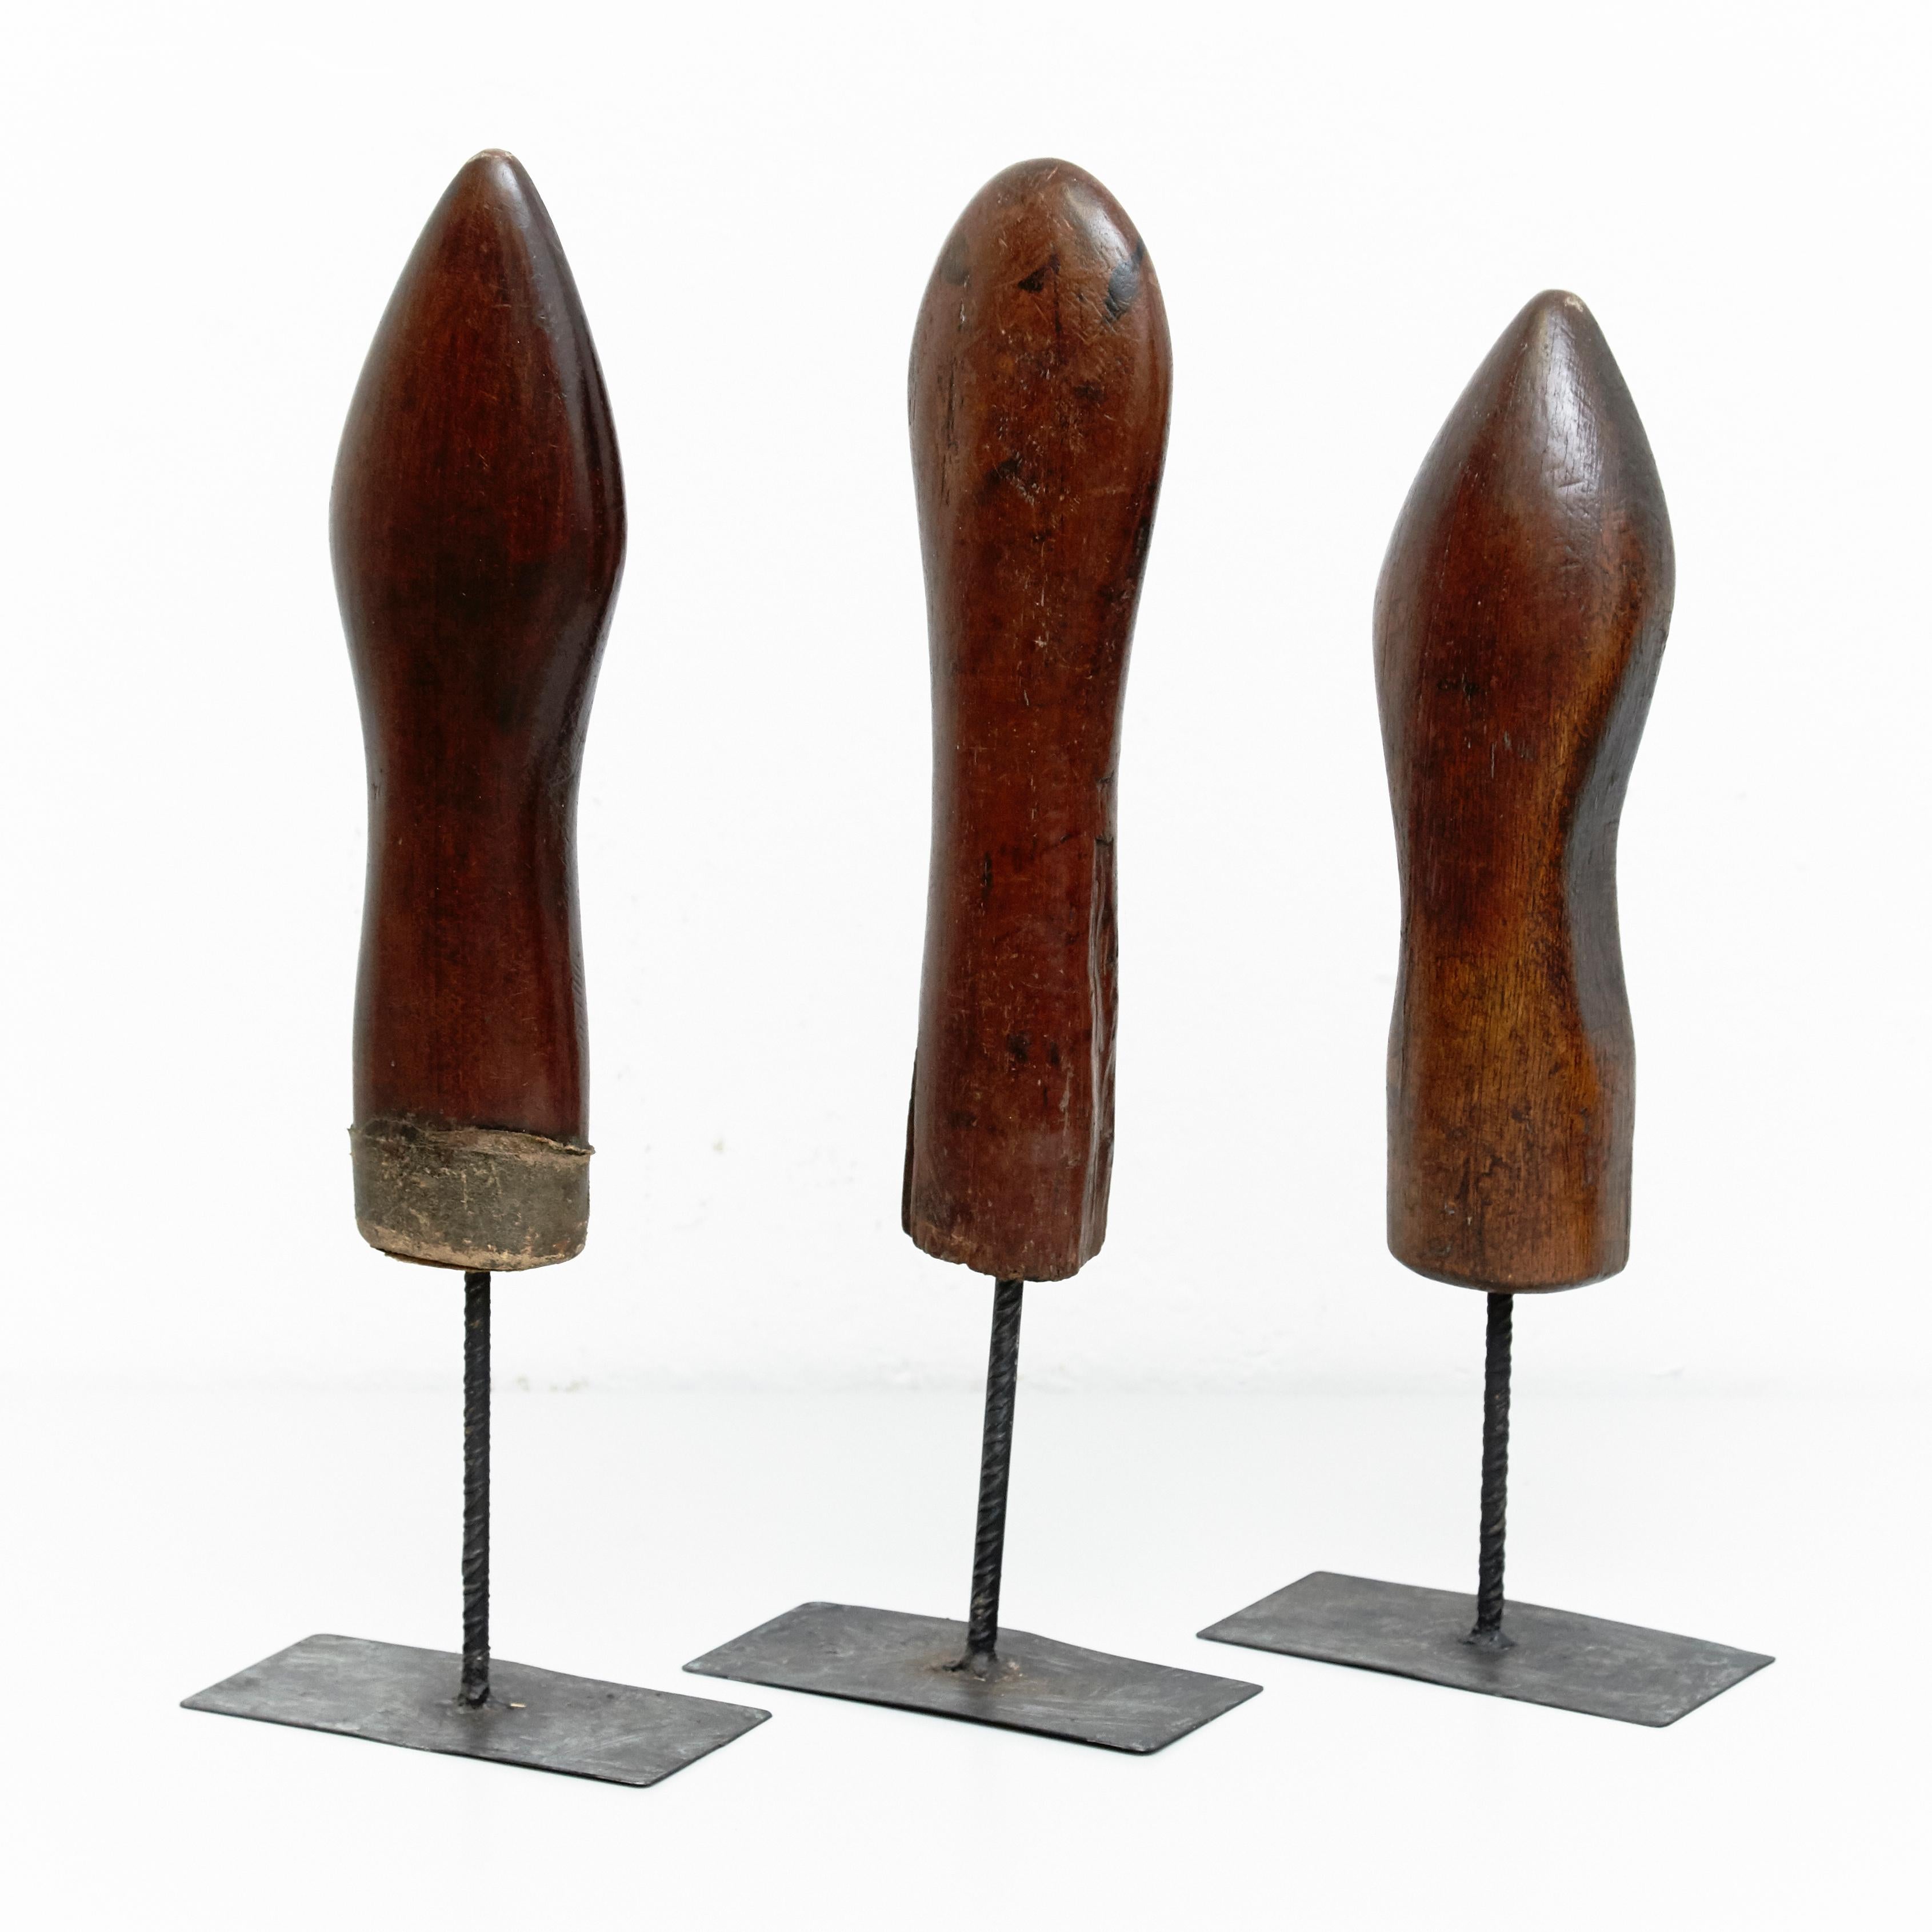 Mid-20th Century Set of 3 Mid-Century Modern Wood and Metal Sculptures, circa 1950